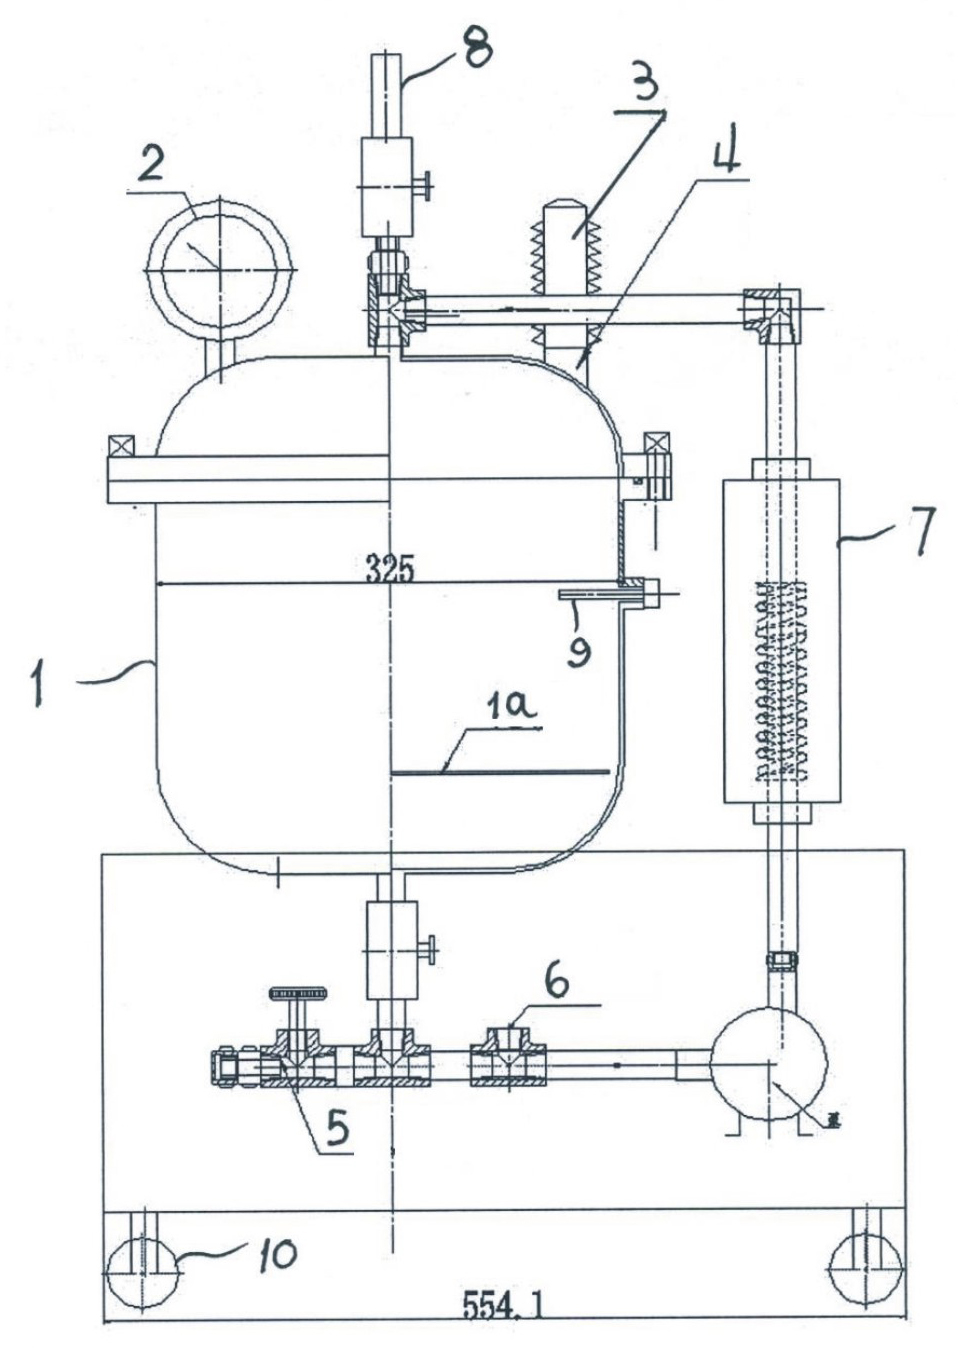 Spot simulation device for fault oil product of transformer